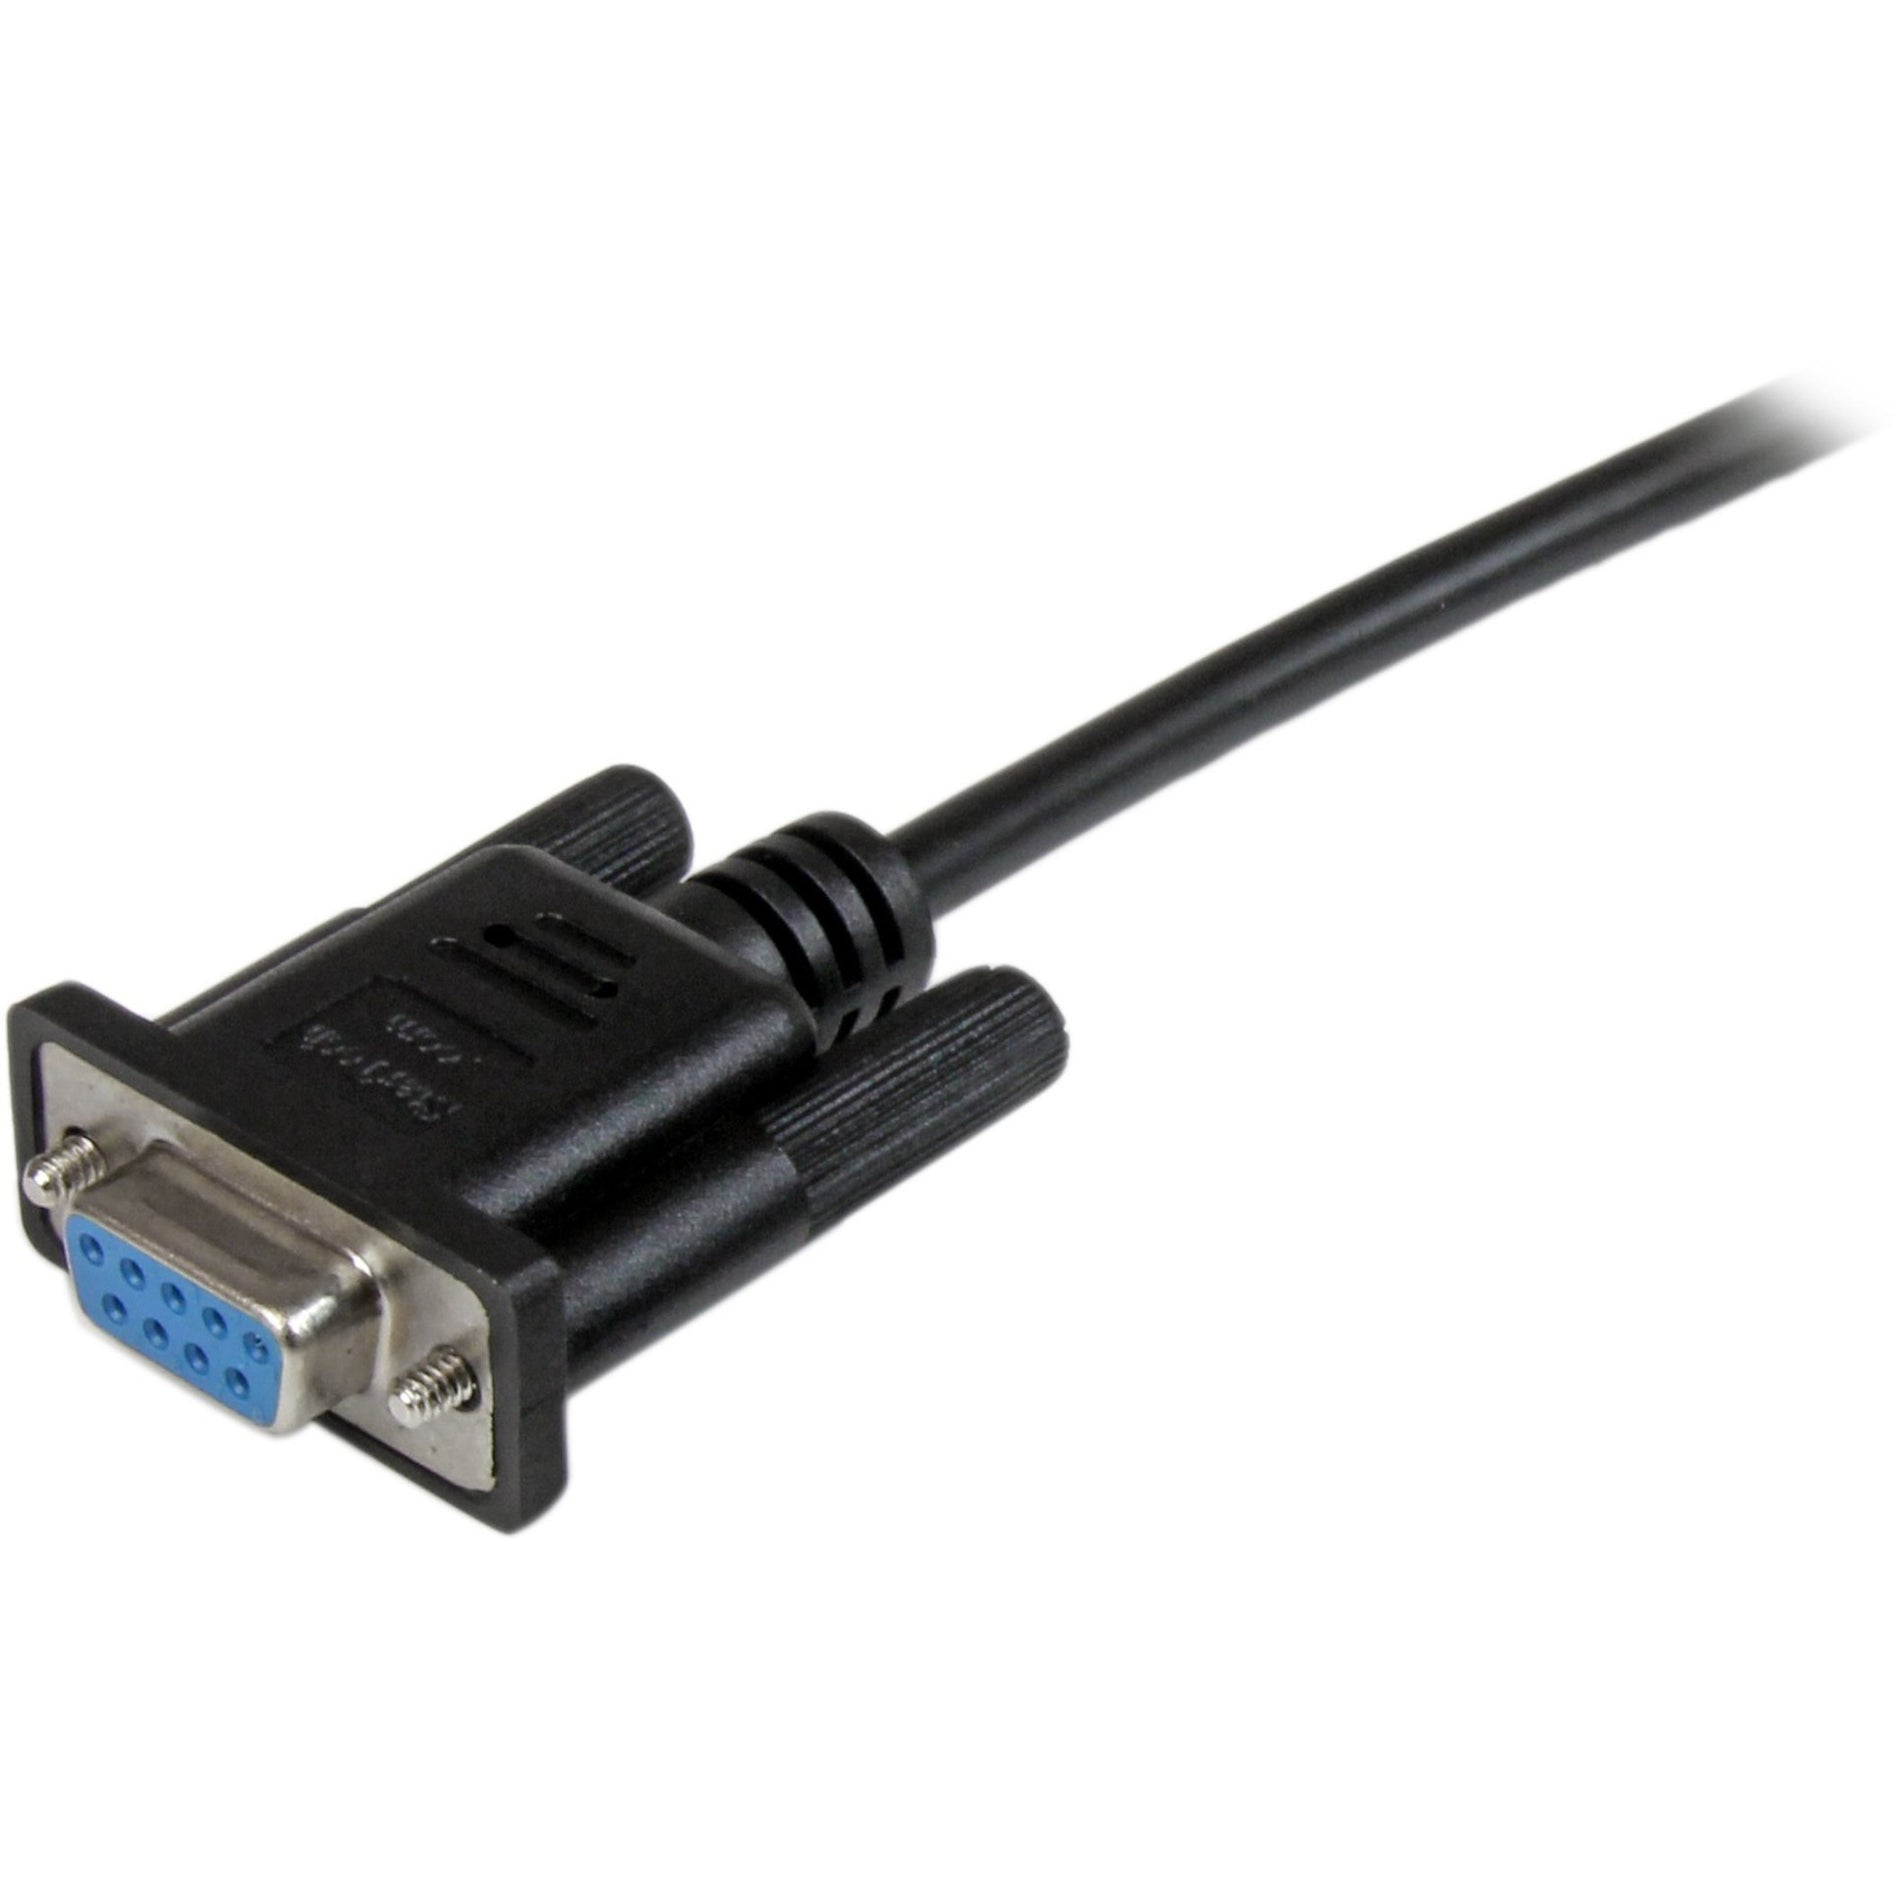 StarTech.com SCNM9FF2MBK 2m Black DB9 RS232 Serial Null Modem Cable F/F, Molded, EMI Protection, Strain Relief